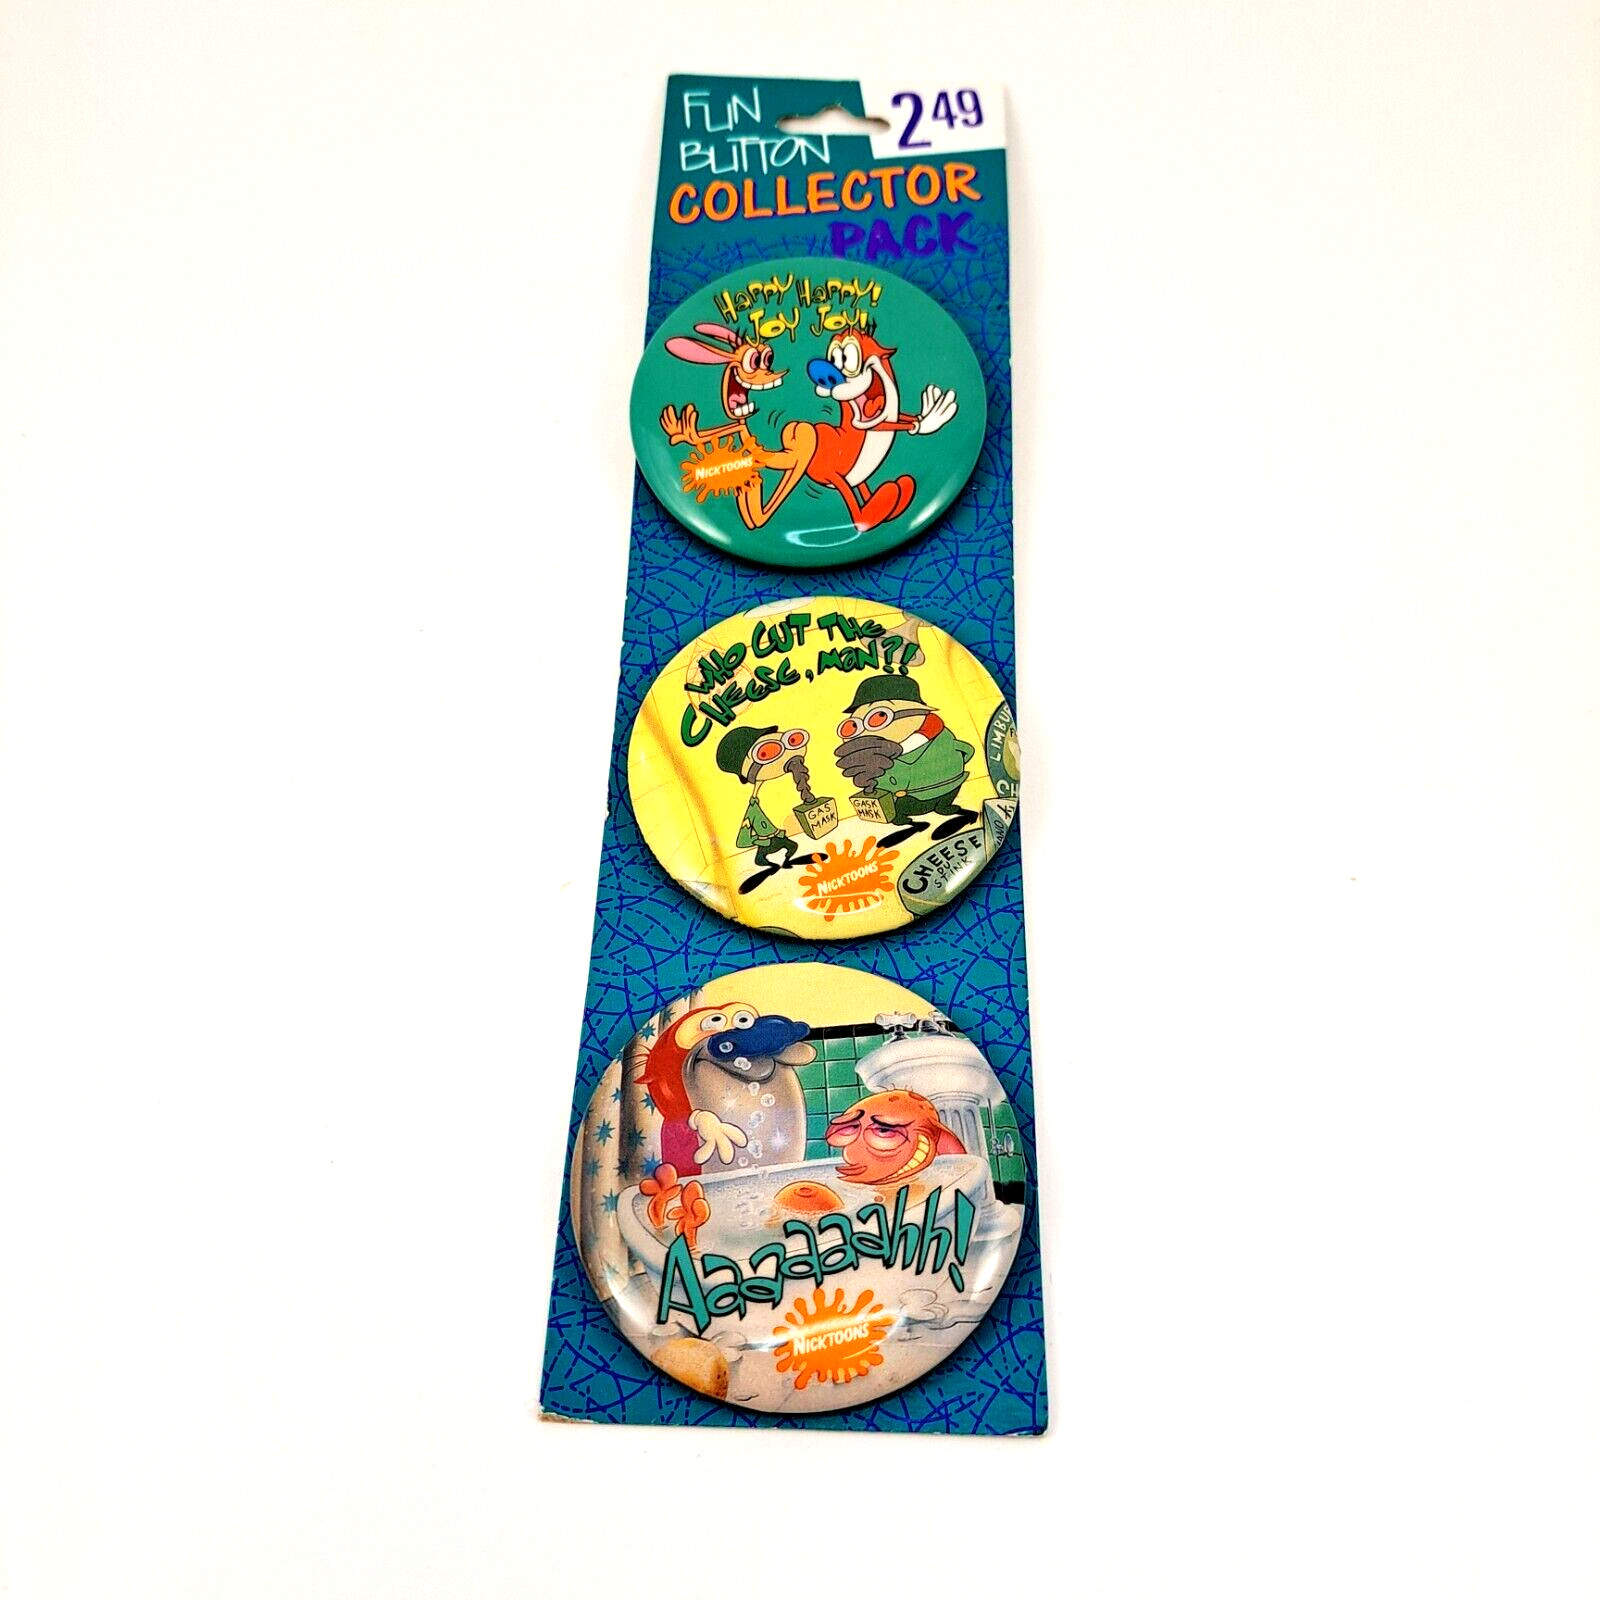 NOS 1992 Trends Nickelodeon Ren & Stimpy Set of 3 Fun Button Collector Pack